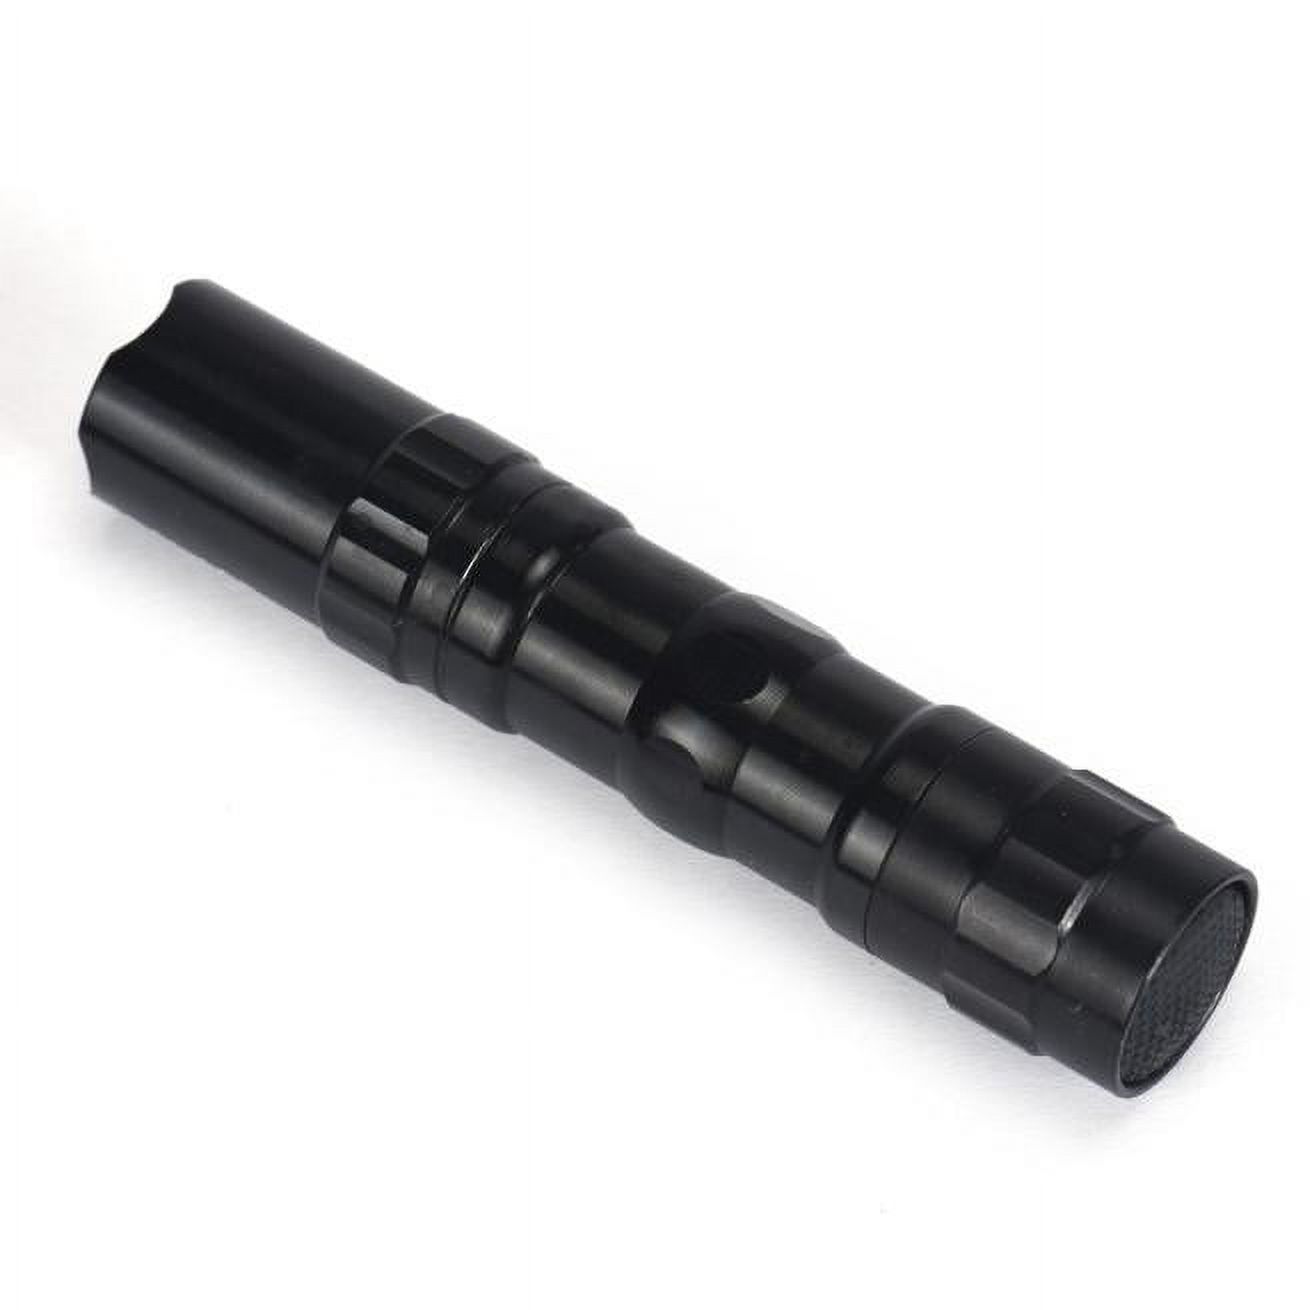 3W Super Bright LED  Clamp AA Flashlight Focus Torch Light - image 3 of 5